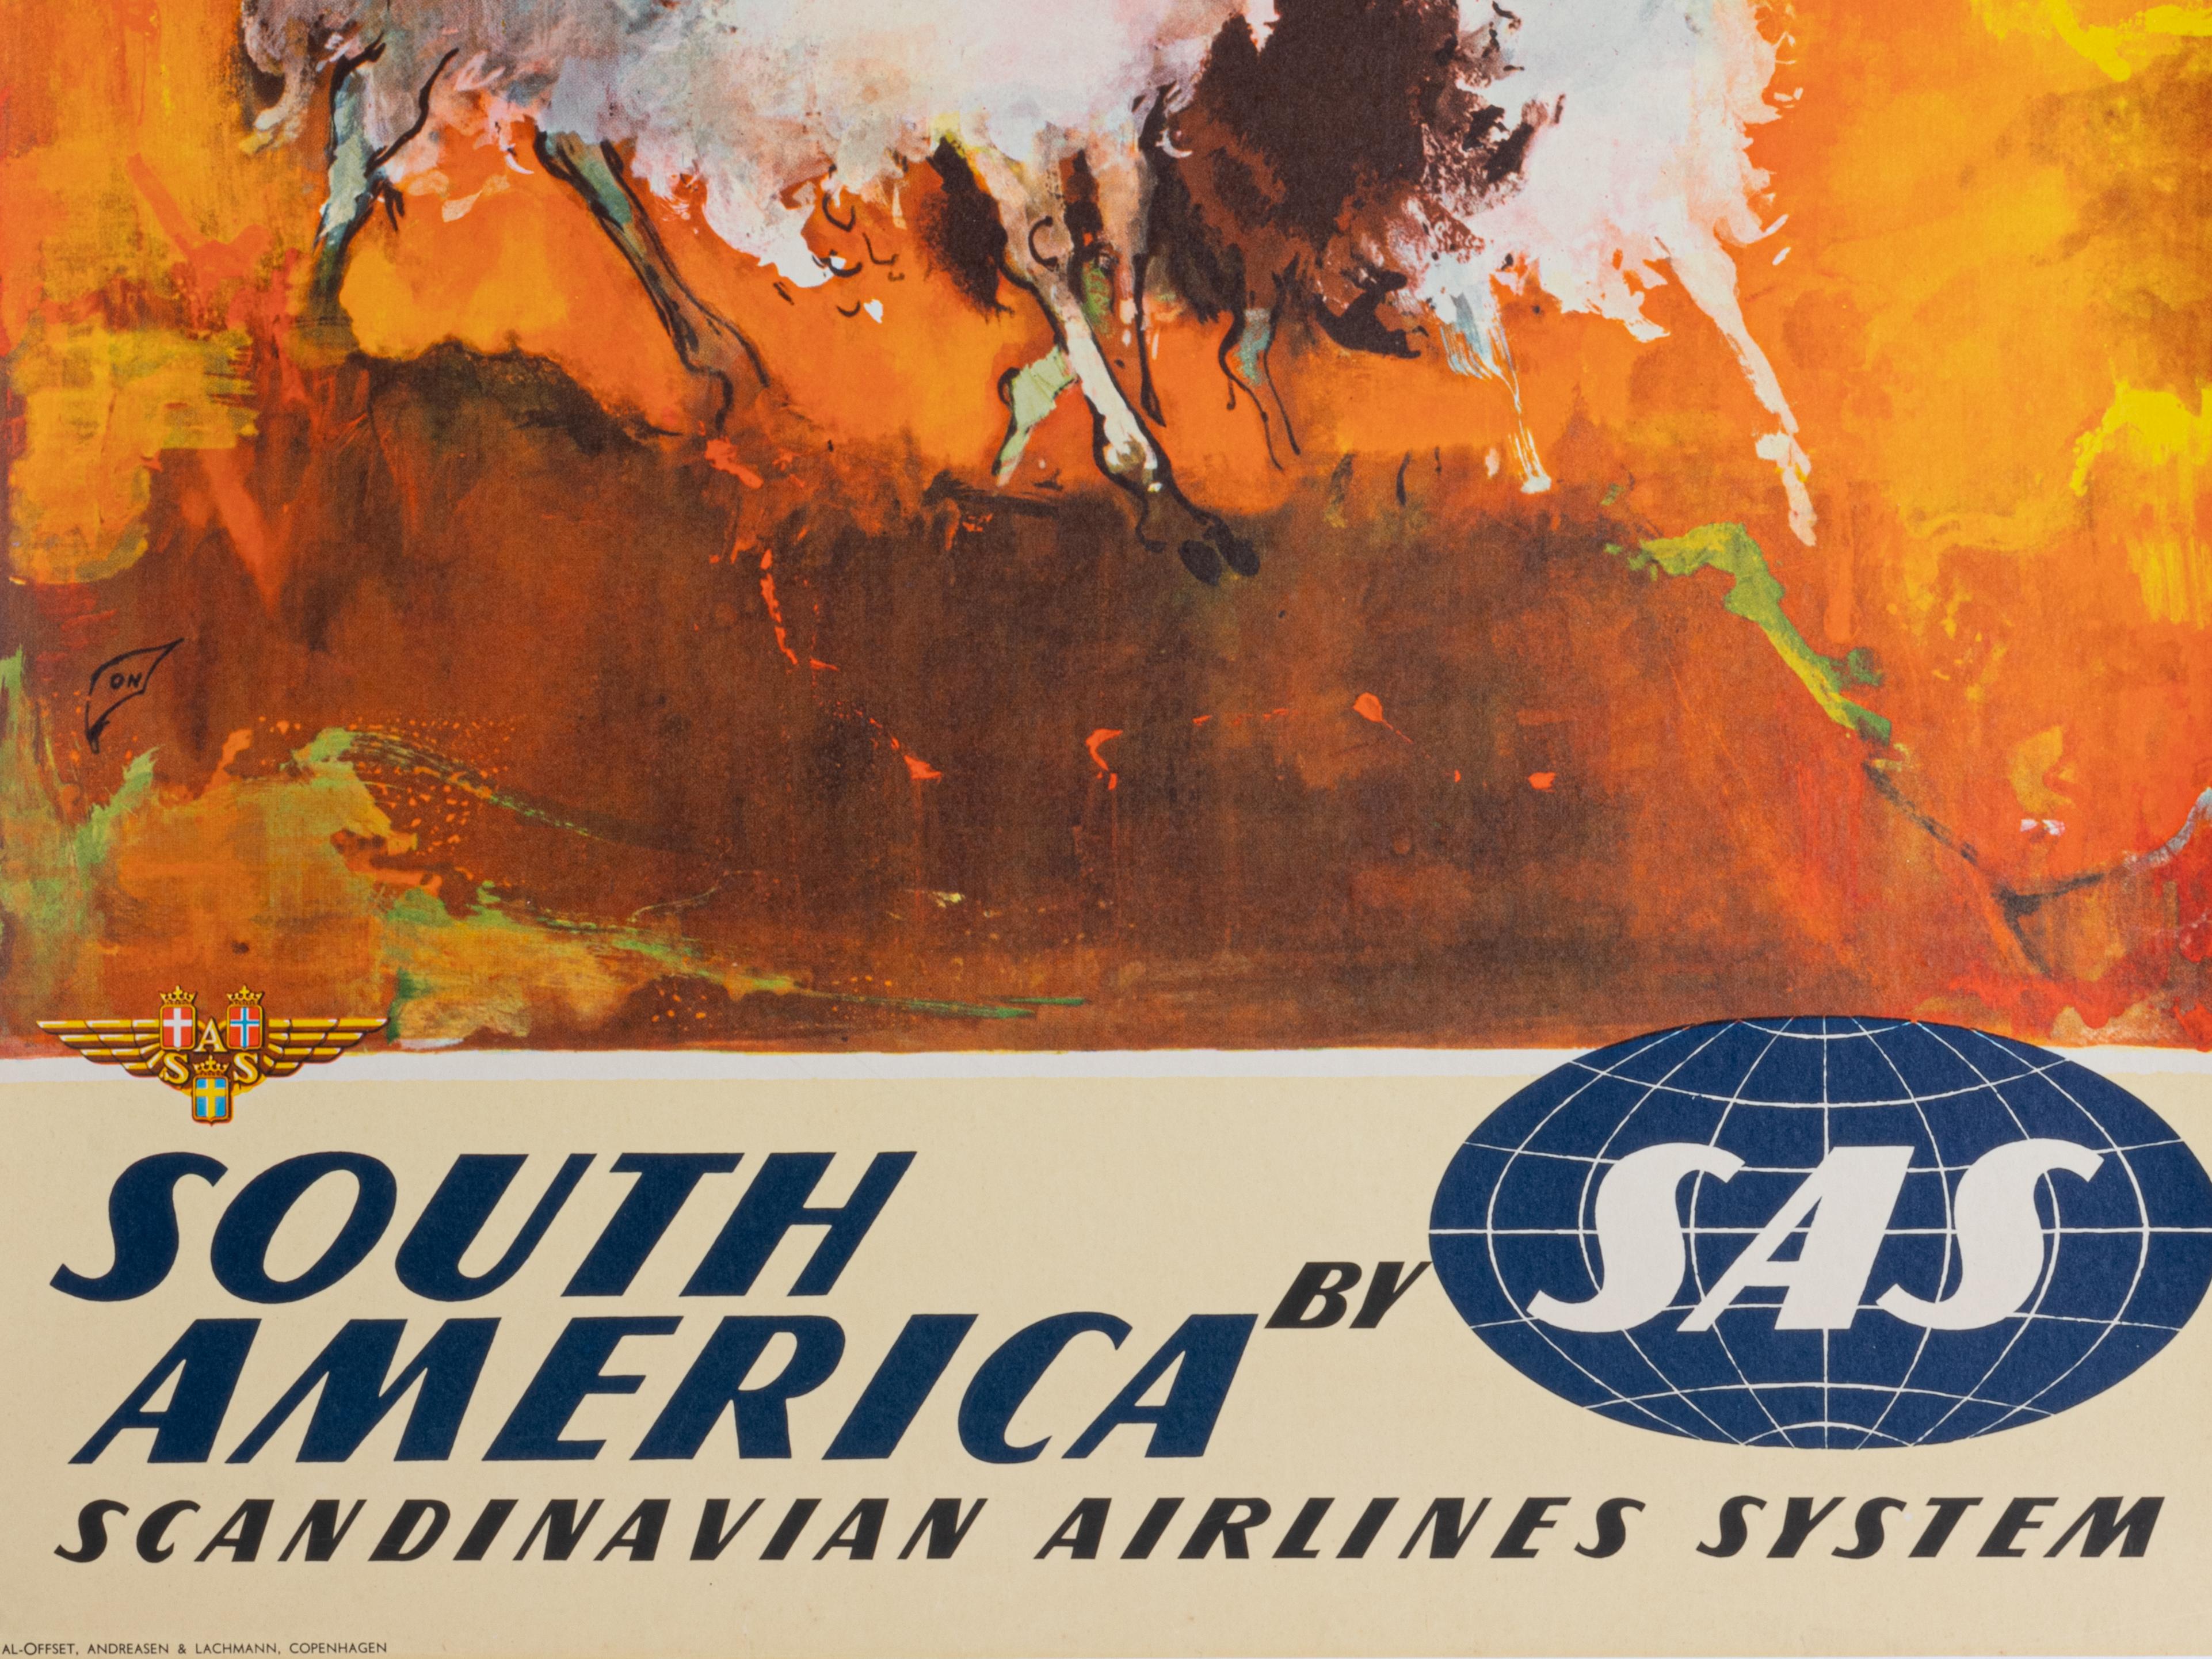 Scandinavian advertising poster for SAS to promote tourism in Southern America.

Artist: Otto Nielsen (1916 - 2000)
Title: South America by SAS
Date: 1960
Size (w x h): 24.8 x 39.2 in / 63 x 99.6 cm
Printer: Al-Offset, Andreasen ans Lachmann,